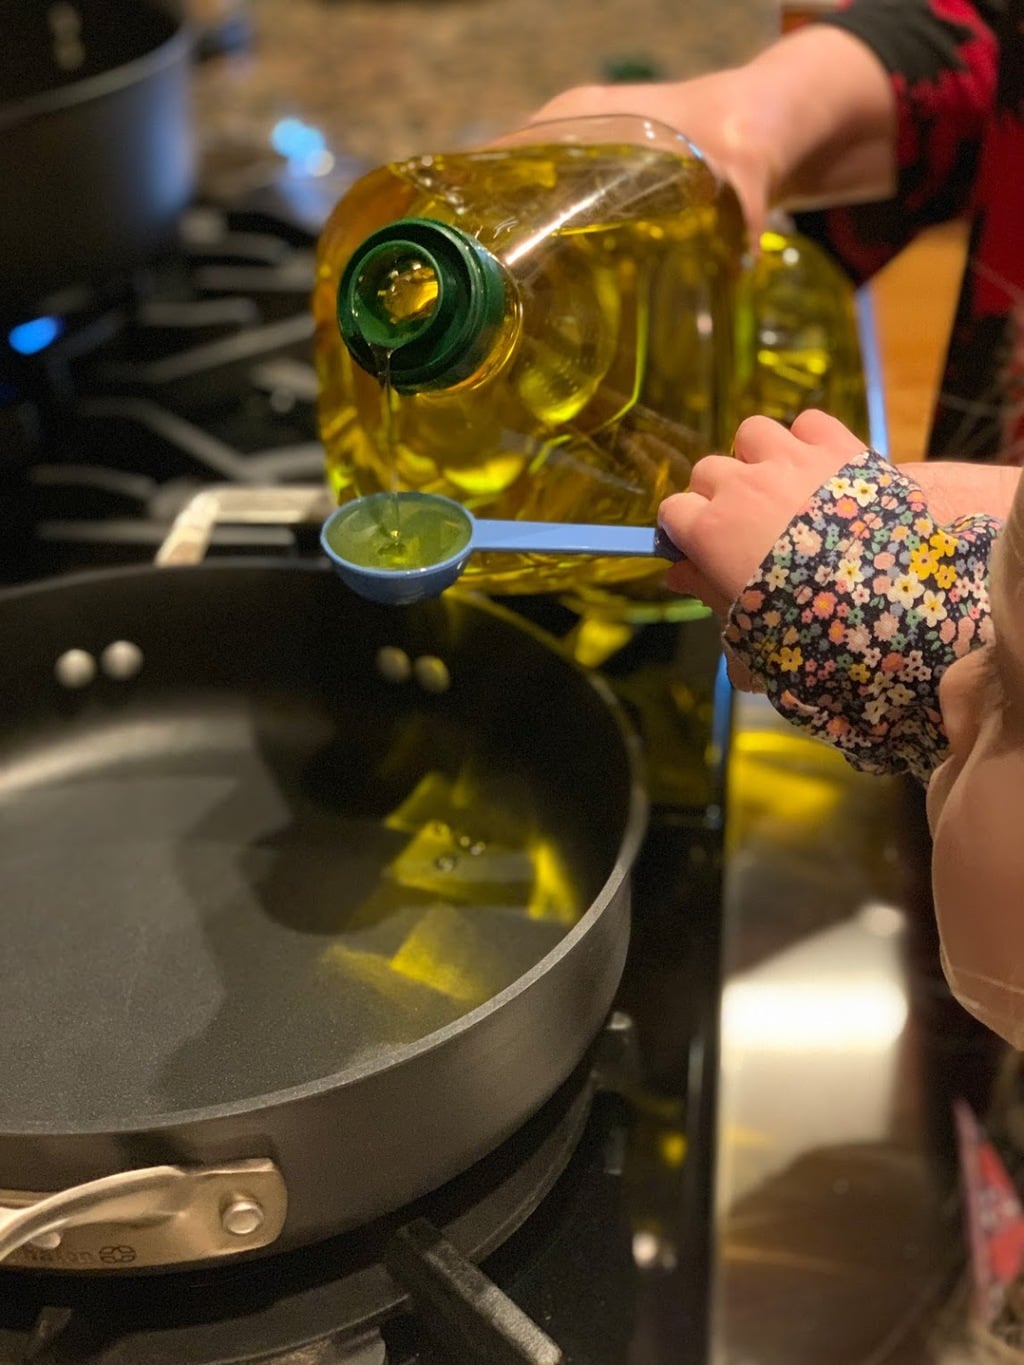 Child pouring oil into pan